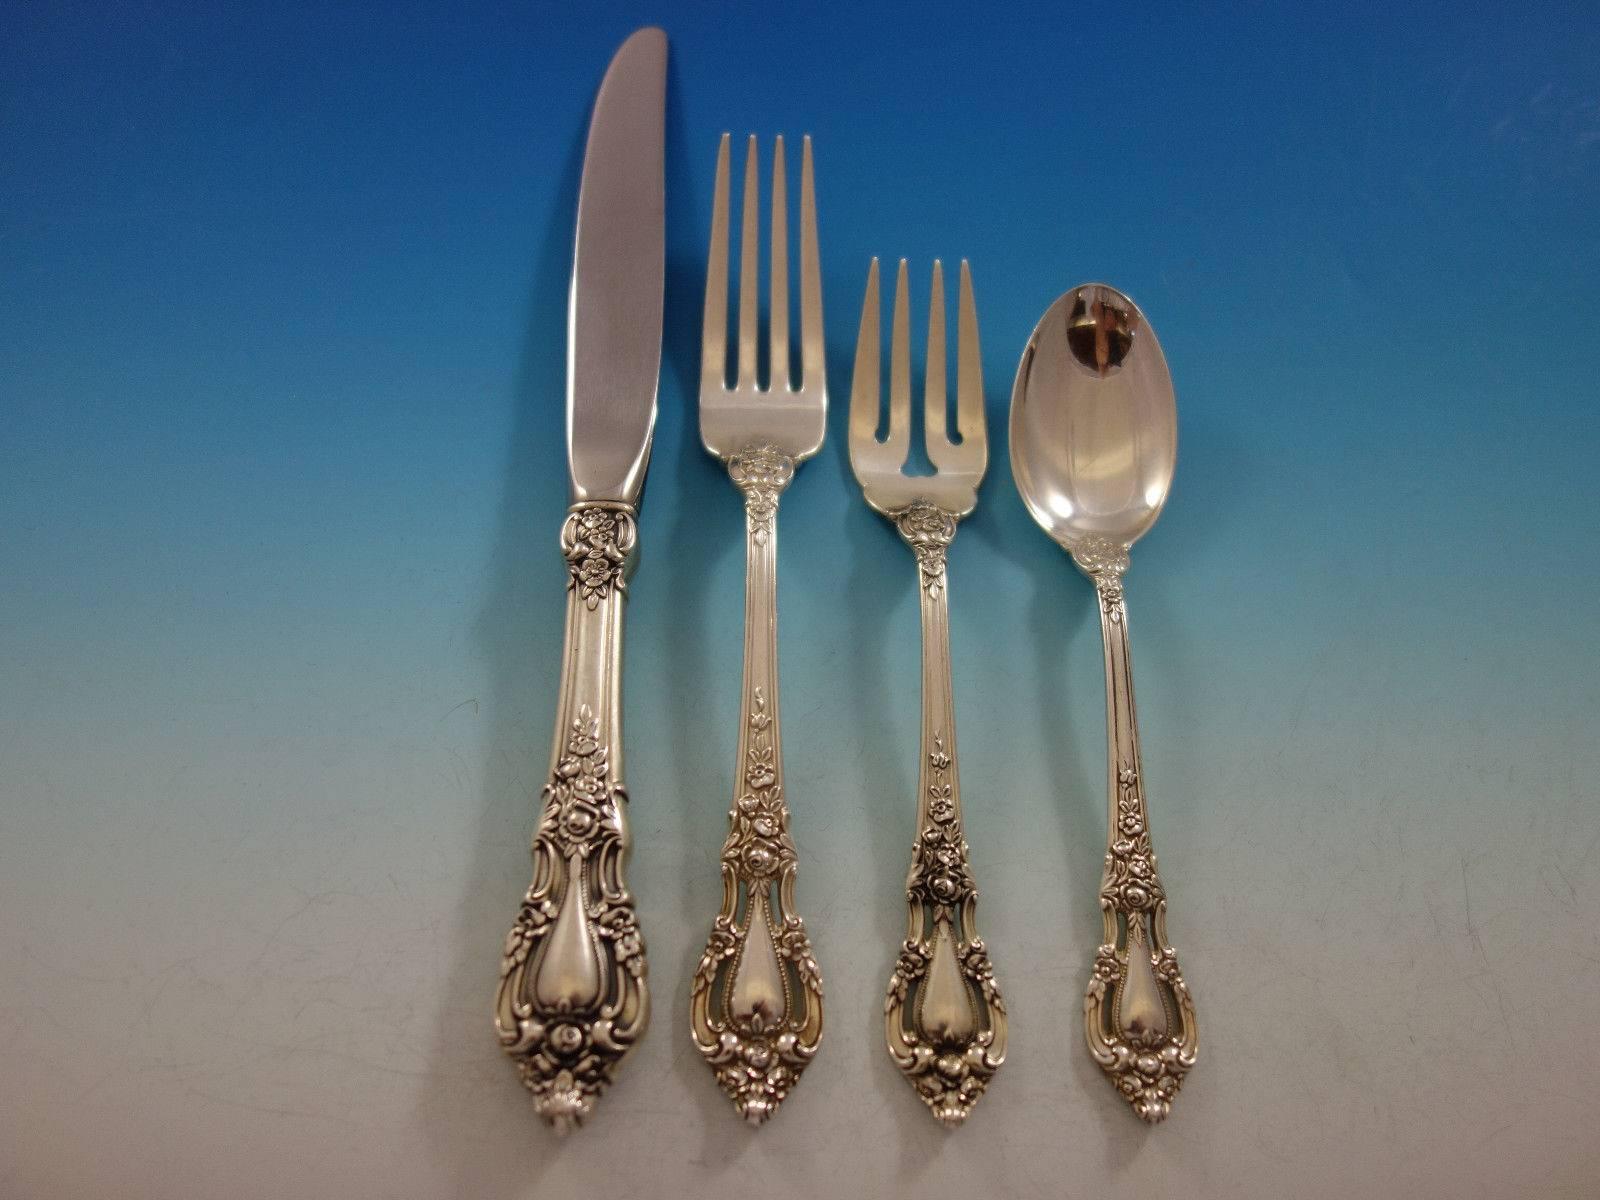 Eloquence by Lunt sterling silver flatware set, 39 piece set, in excellent condition. This set includes: 

Eight knives, 9 1/8